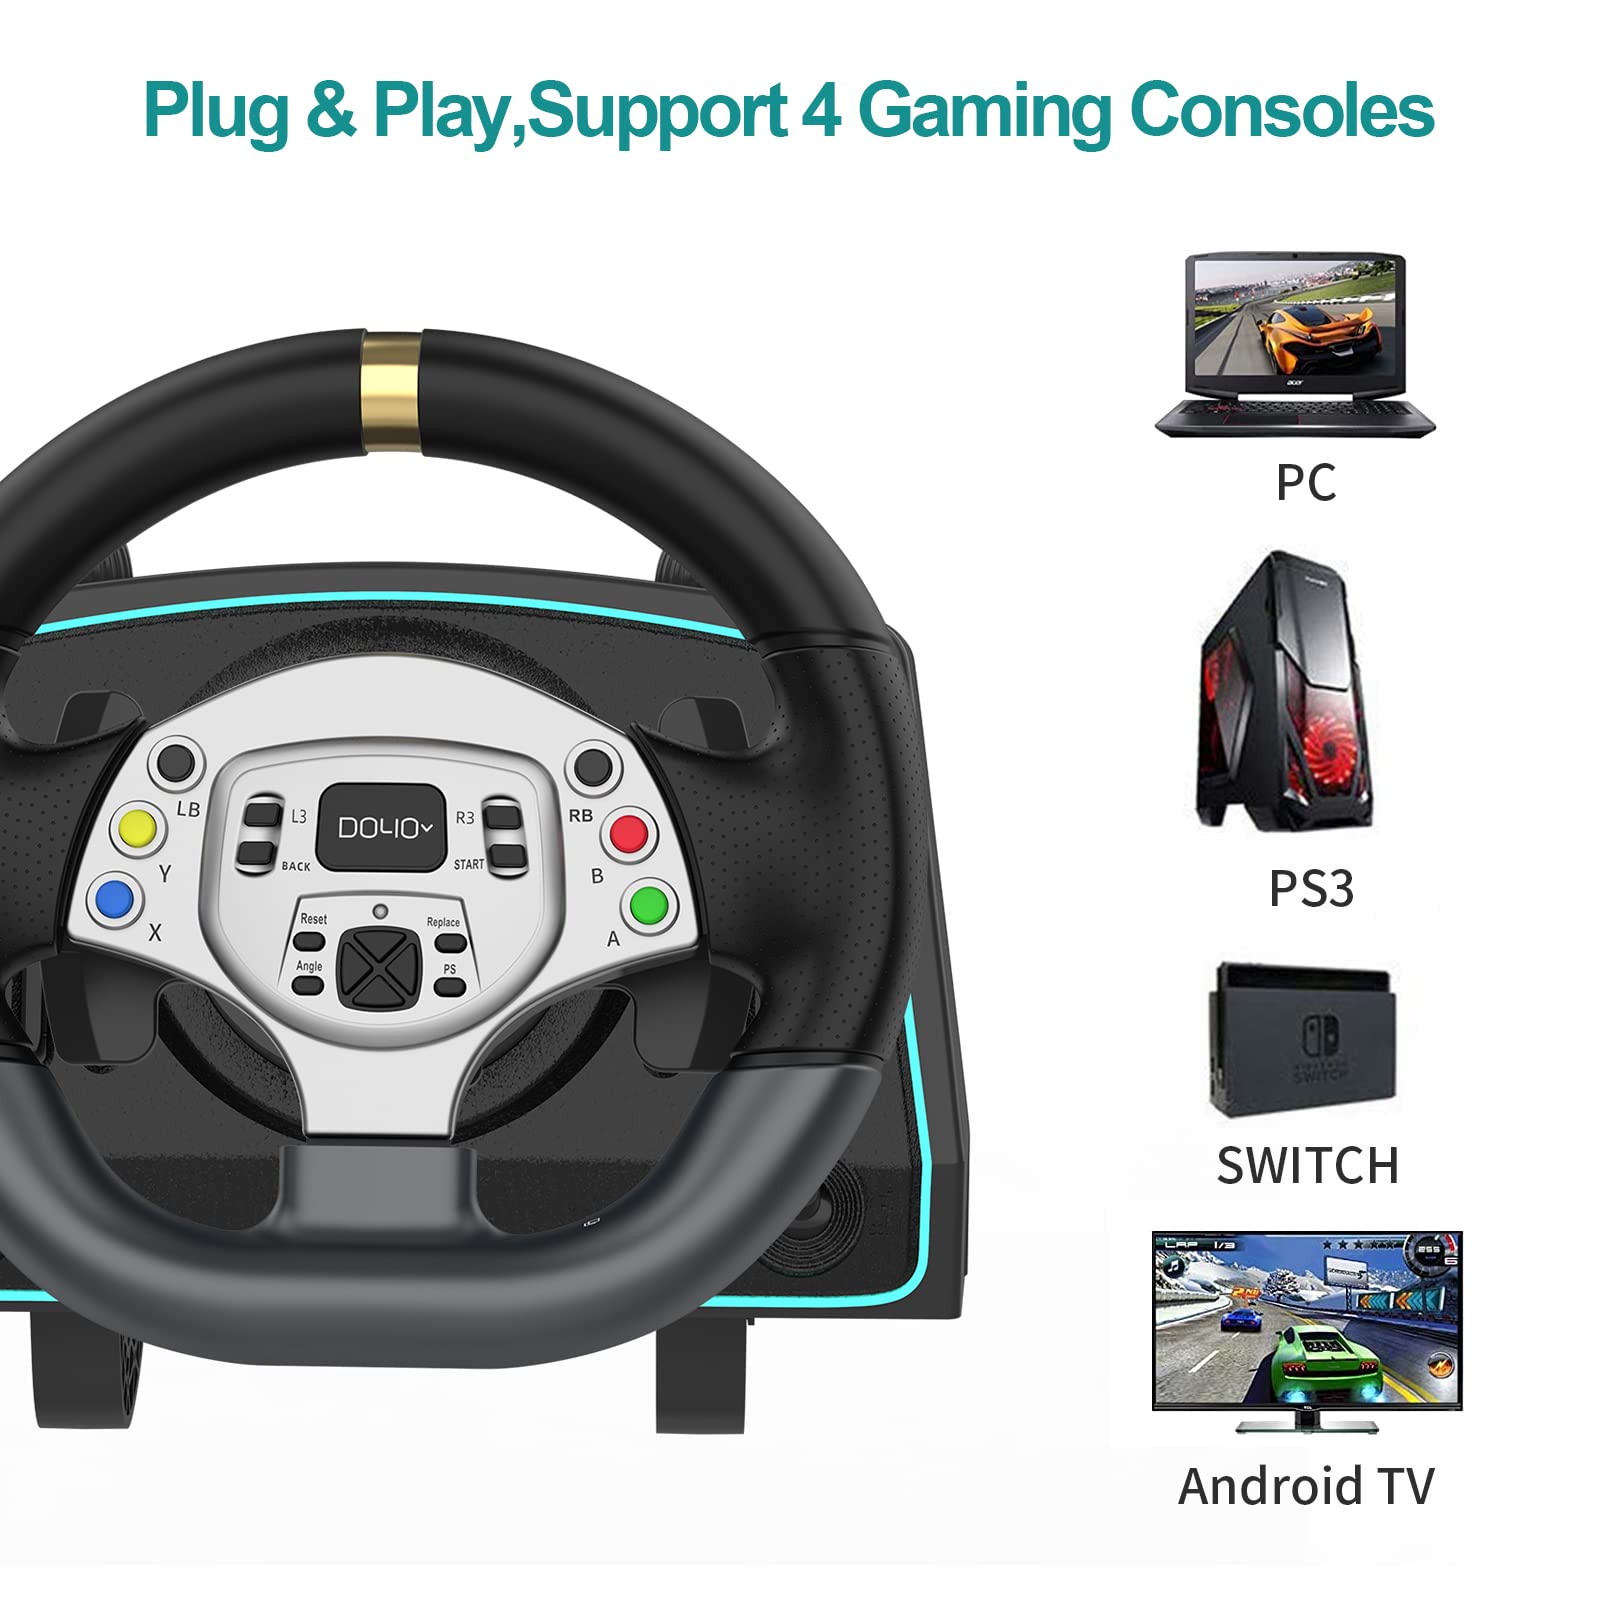 NBCP Racing Wheel, Gaming Steering Wheels Driving Sim Car Simulator 270° Pro Volante PC Pedals Paddle Gear Shifters for PC, PS3, Switch, Android TV